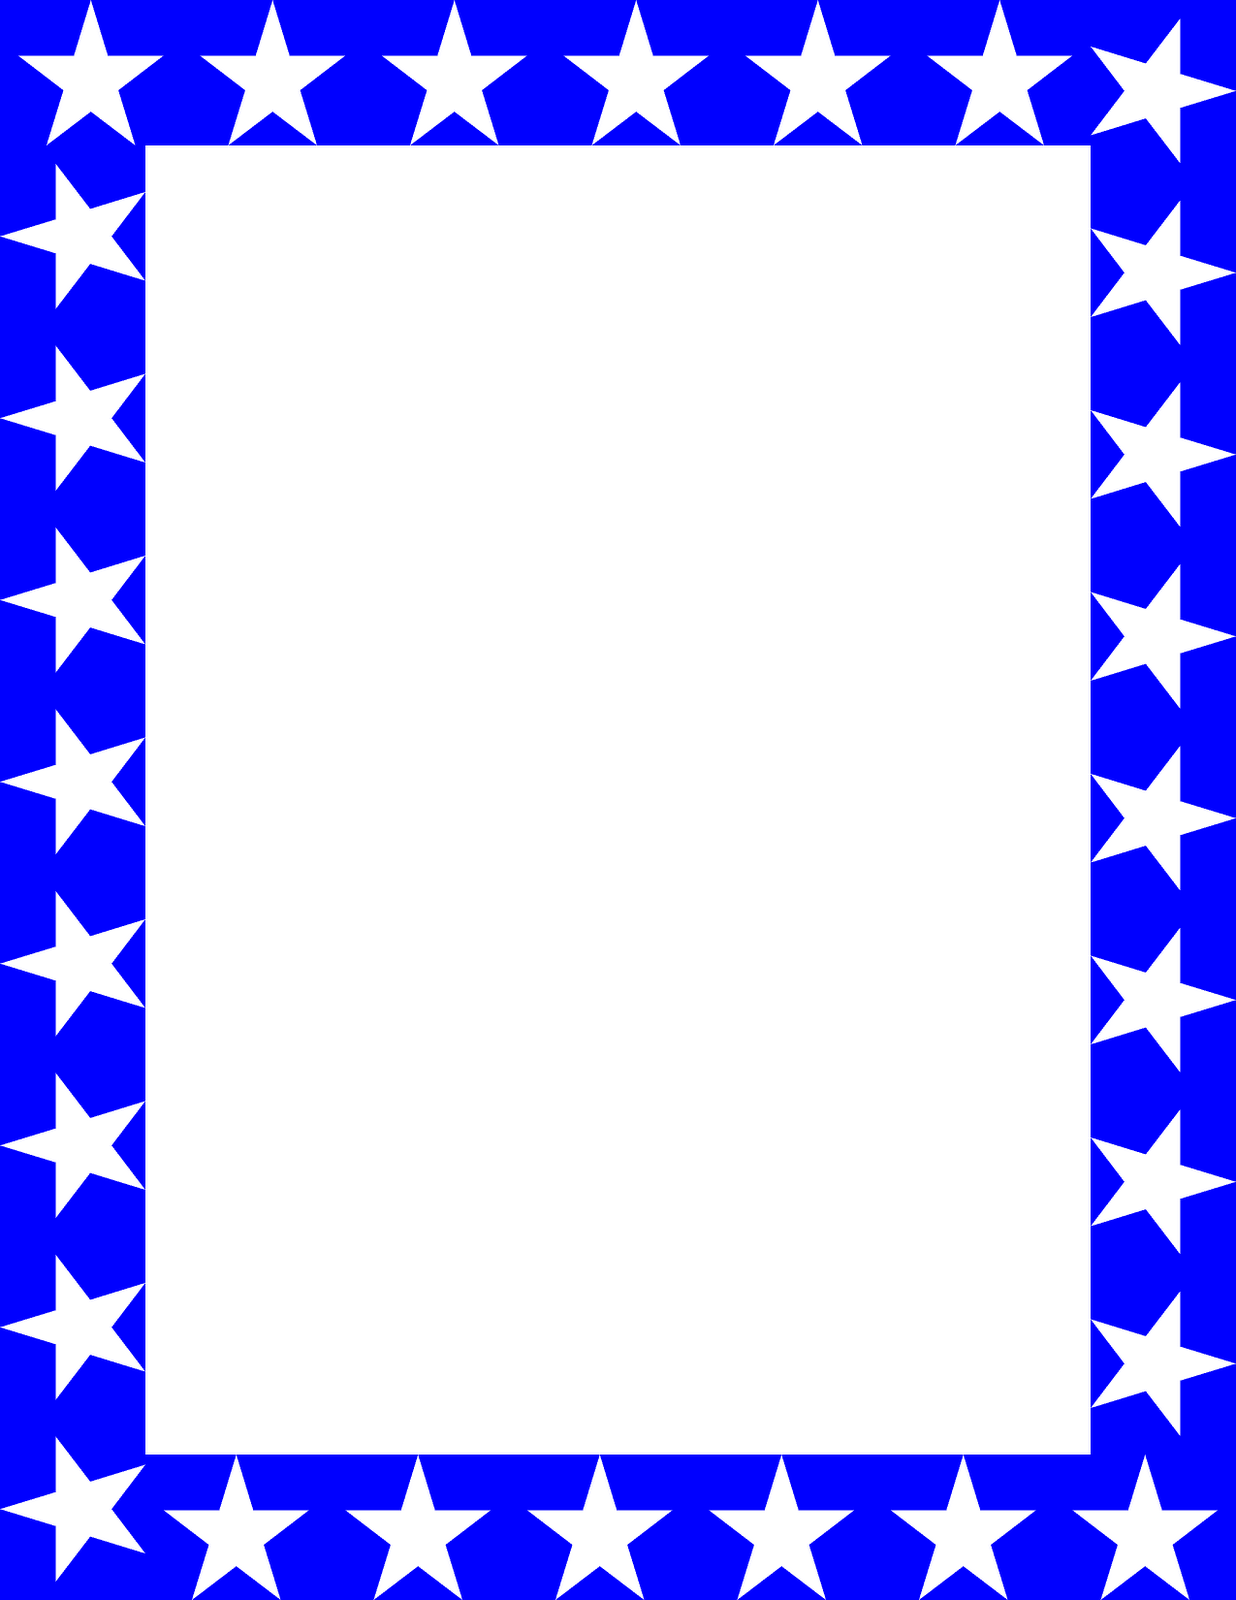 Red white and blue star border clipart